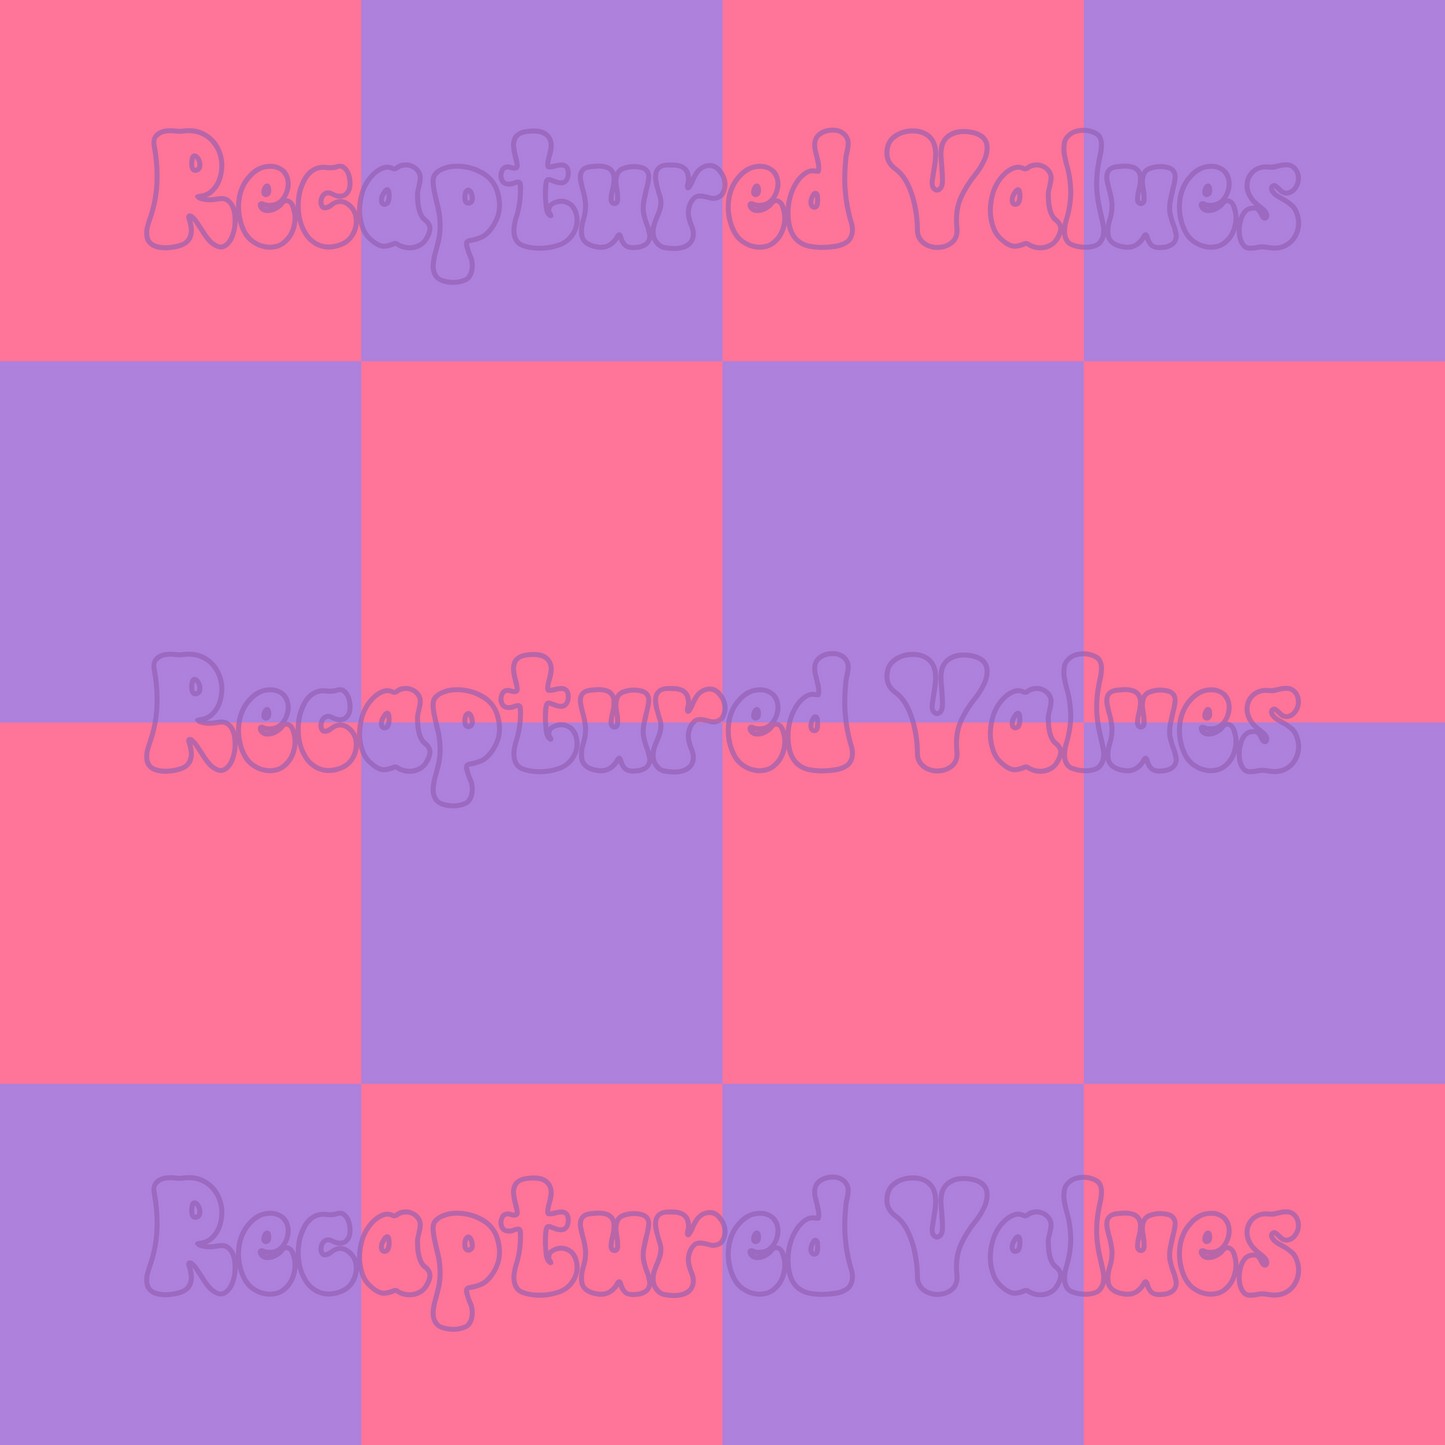 Purple and Pink Ghost Slasher Checkers PNG Seamless Pattern Design // Recaptured Values